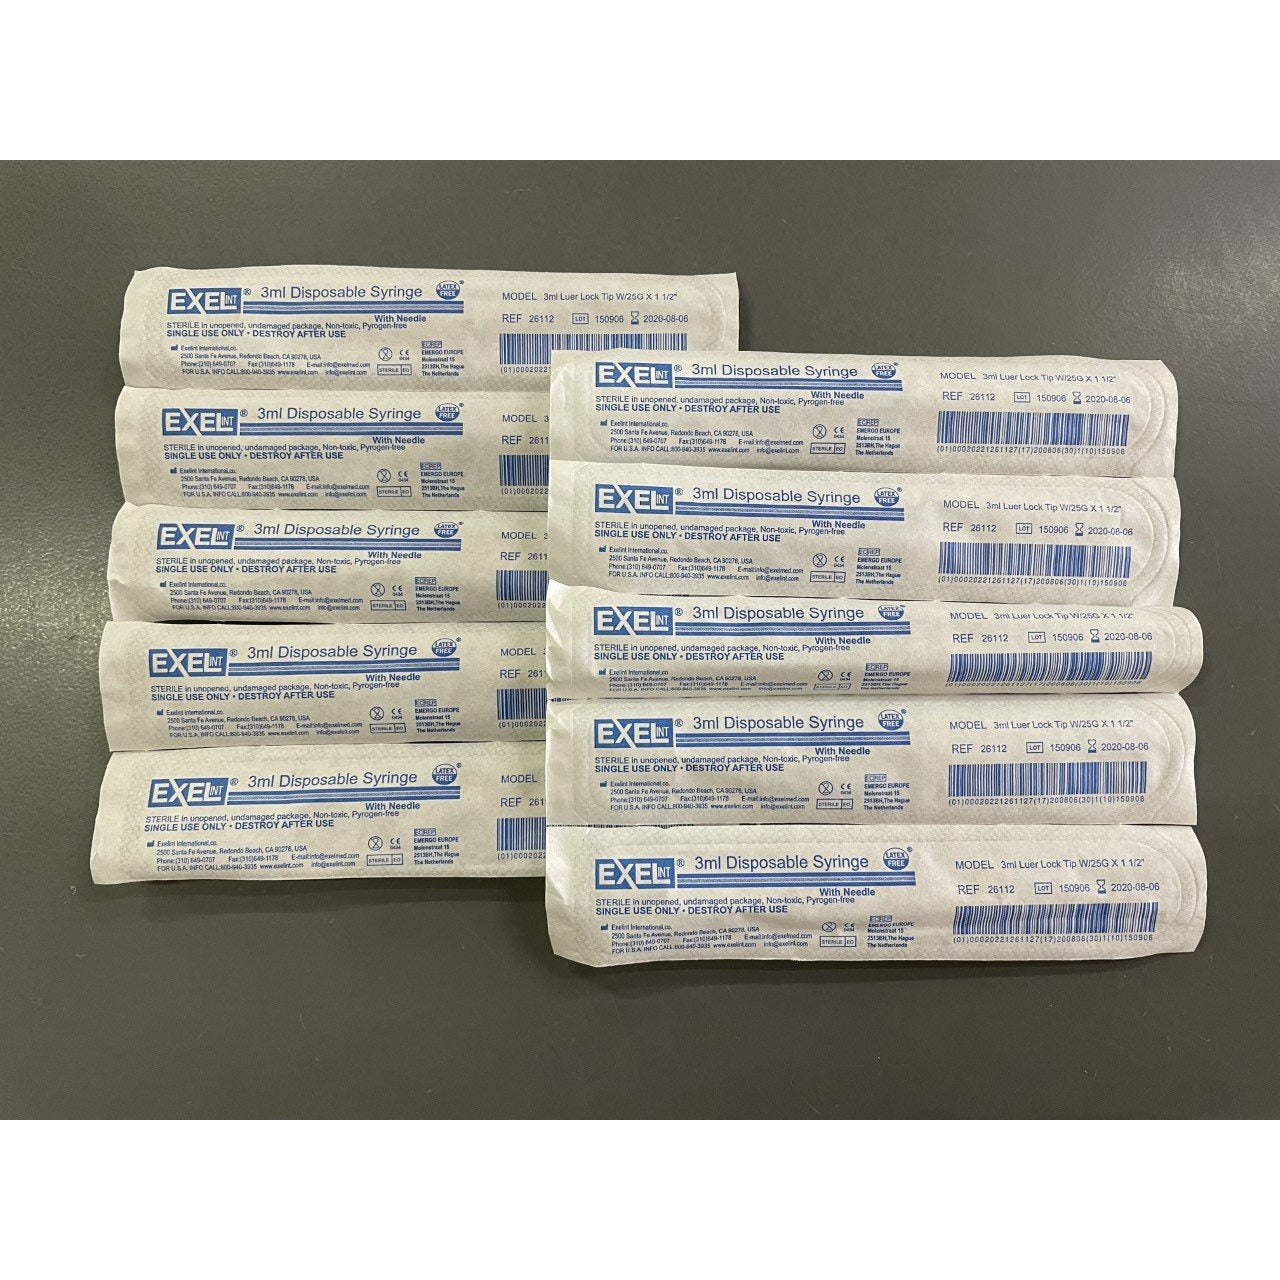 3cc (3ml) 25 Gauge x 5/8” Disposable Syringe with Needle – Westend Supplies